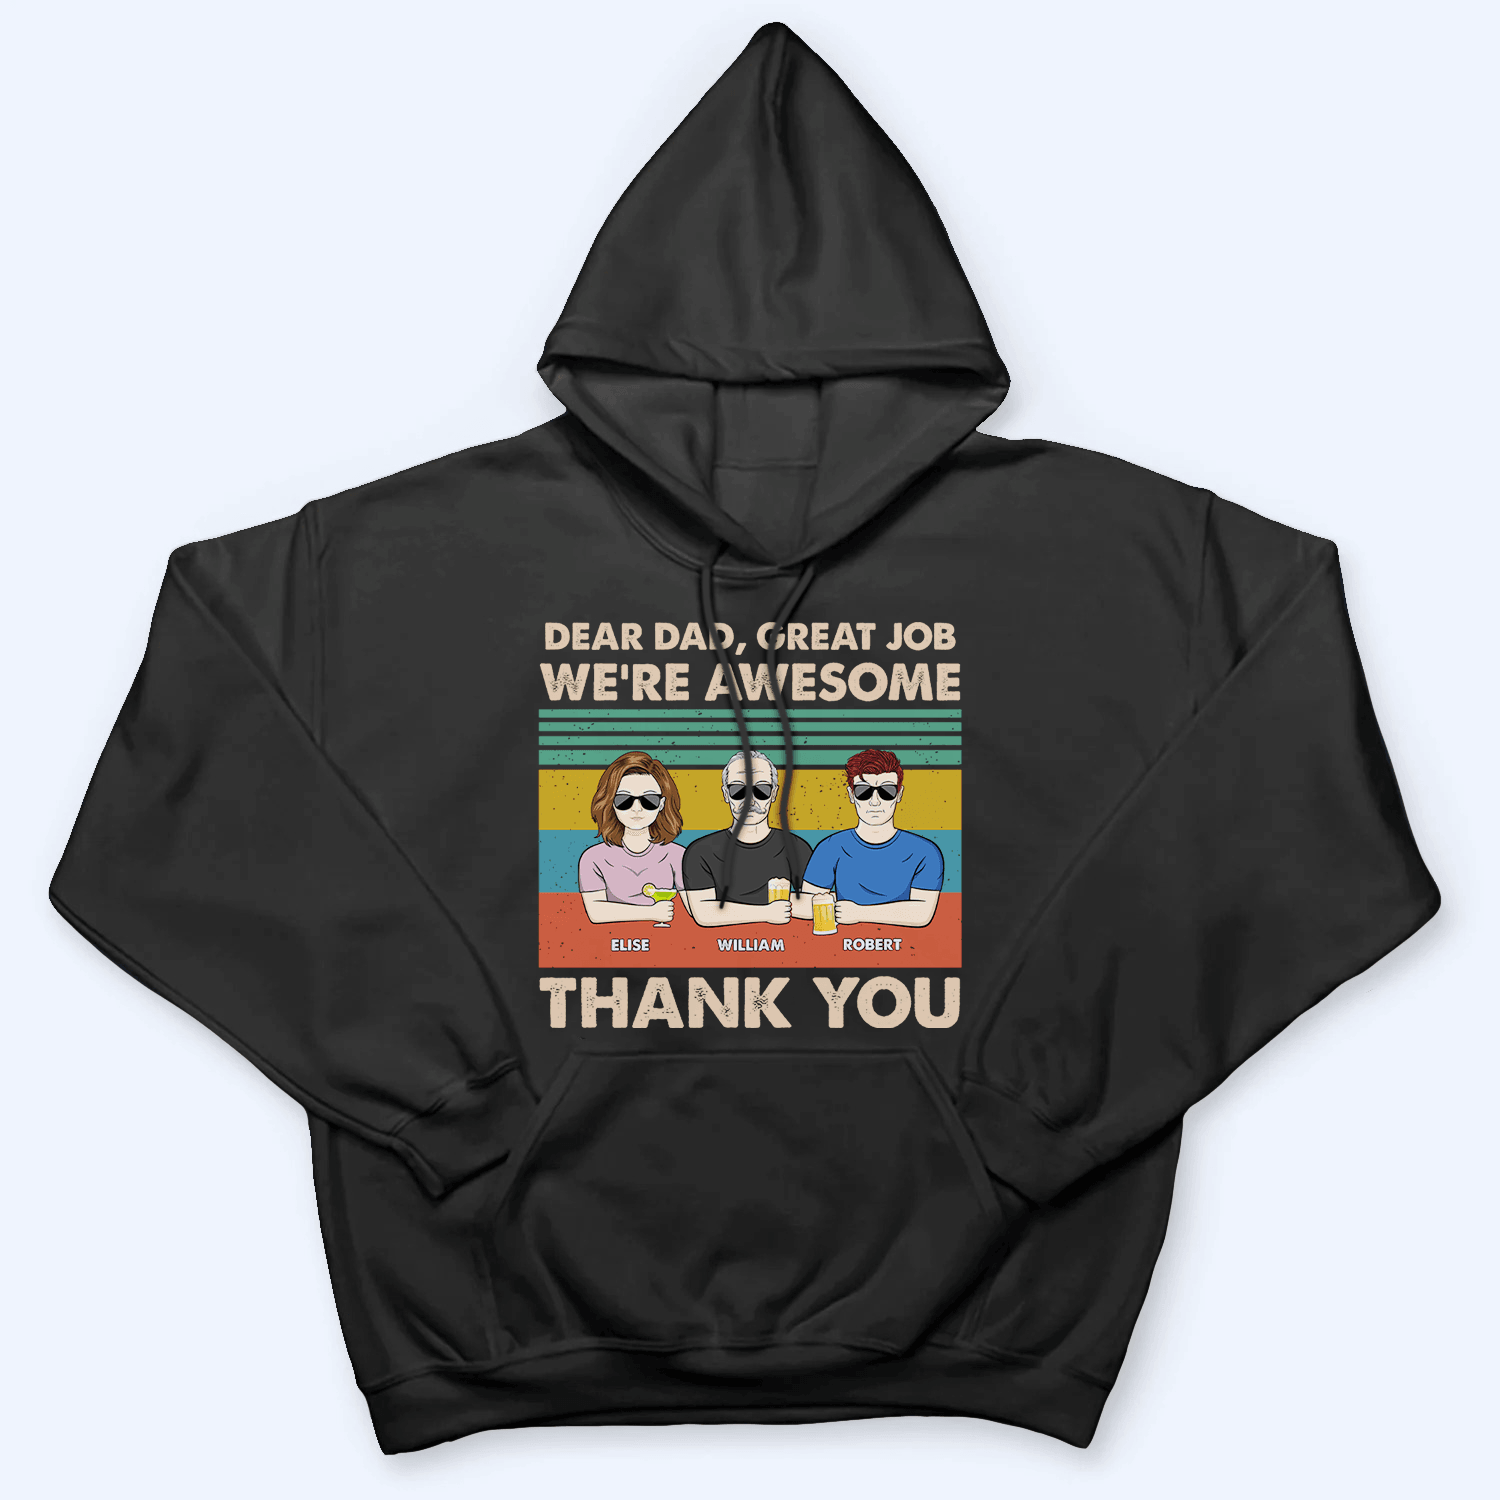 Dear Dad, Great Job We're Awesome Thank You - Personalized Custom T Shirt - Father's Day Gift for Dad, Papa, Grandpa, Daddy, Dada